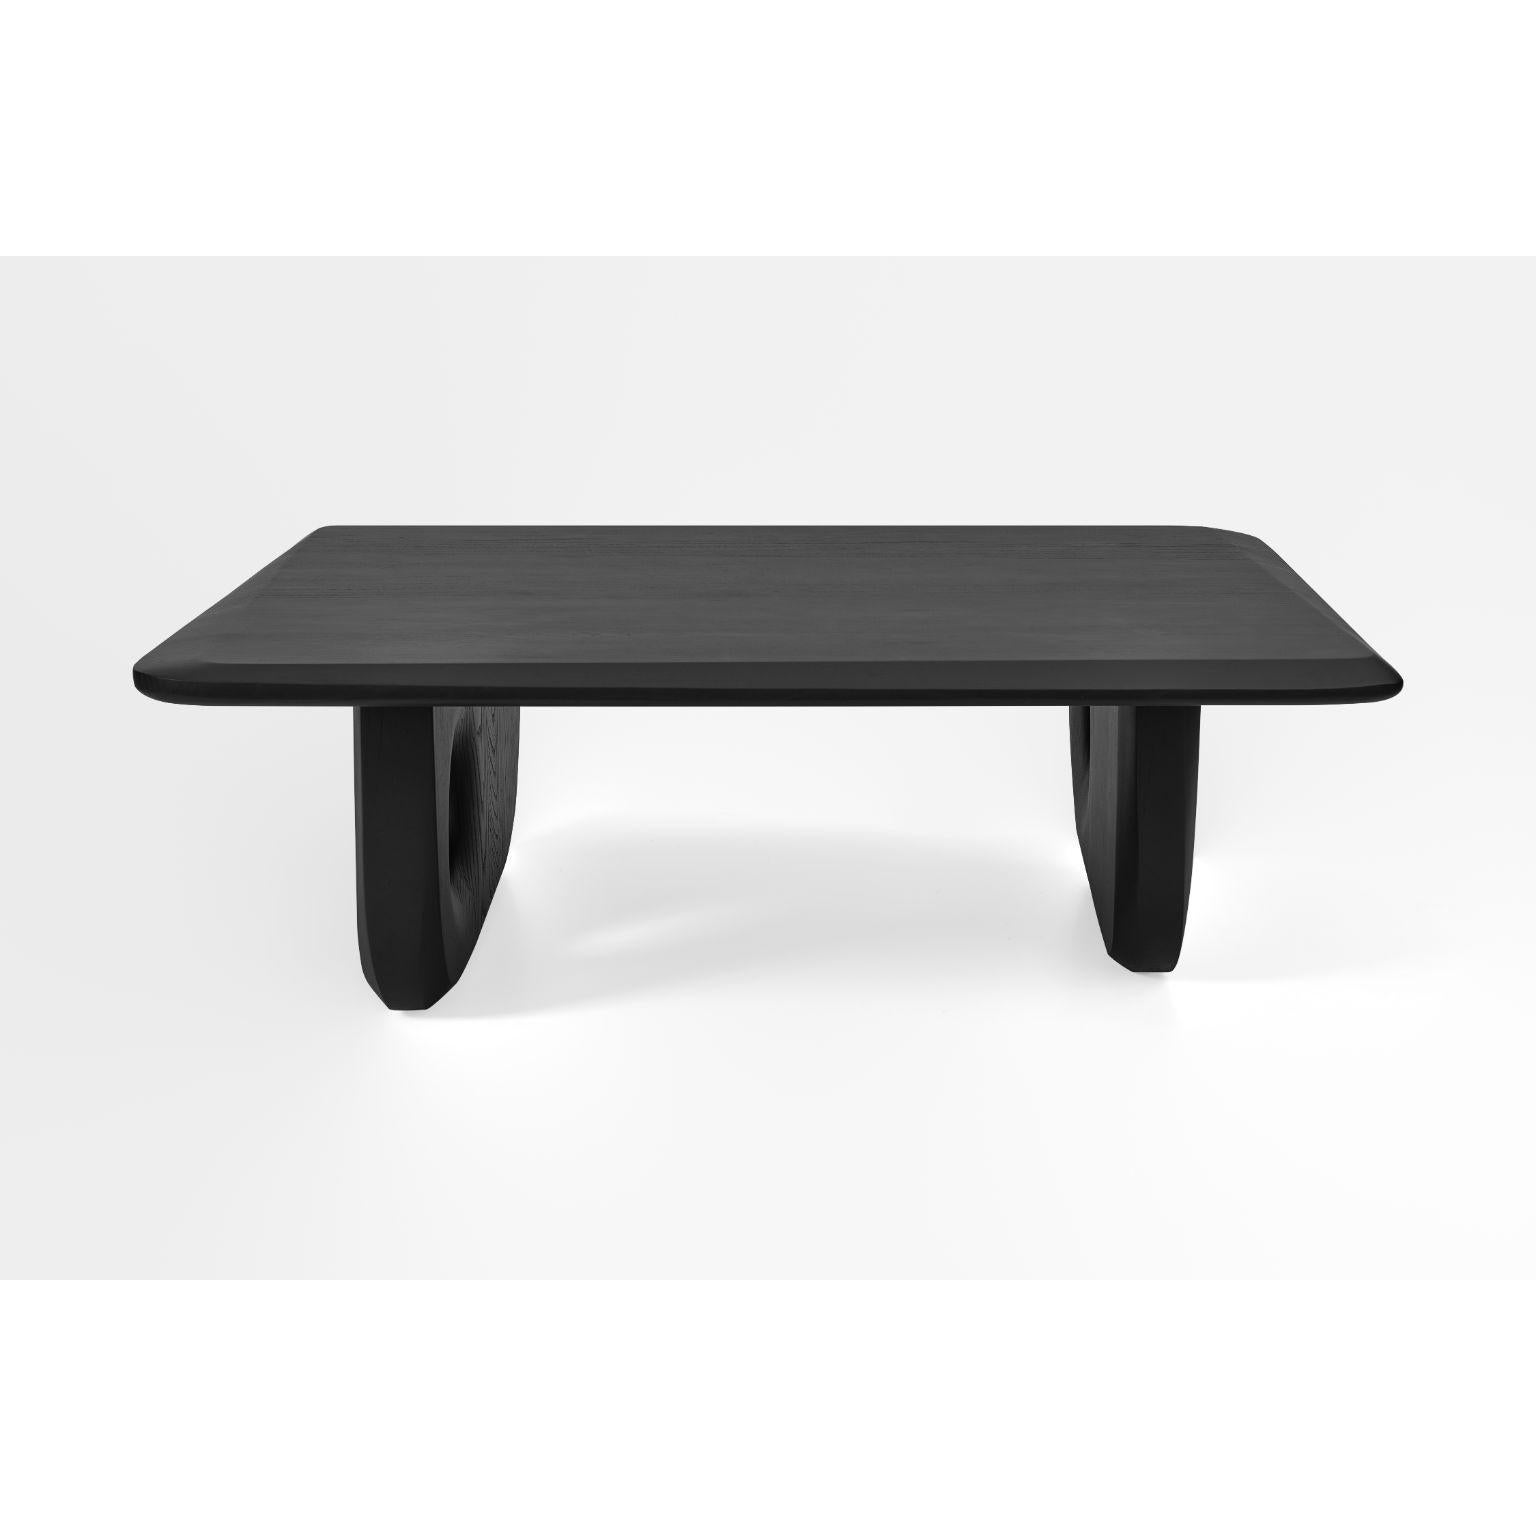 Zomana Low Table M by Contemporary Ecowood
Dimensions: W 108 x D 127 x H 41 cm.
Materials: American Oak.
Color: Transparent Black.

Contemporary Ecowood’s story began in a craft workshop in 2009. Our wood passion made us focus on fallen trees in the